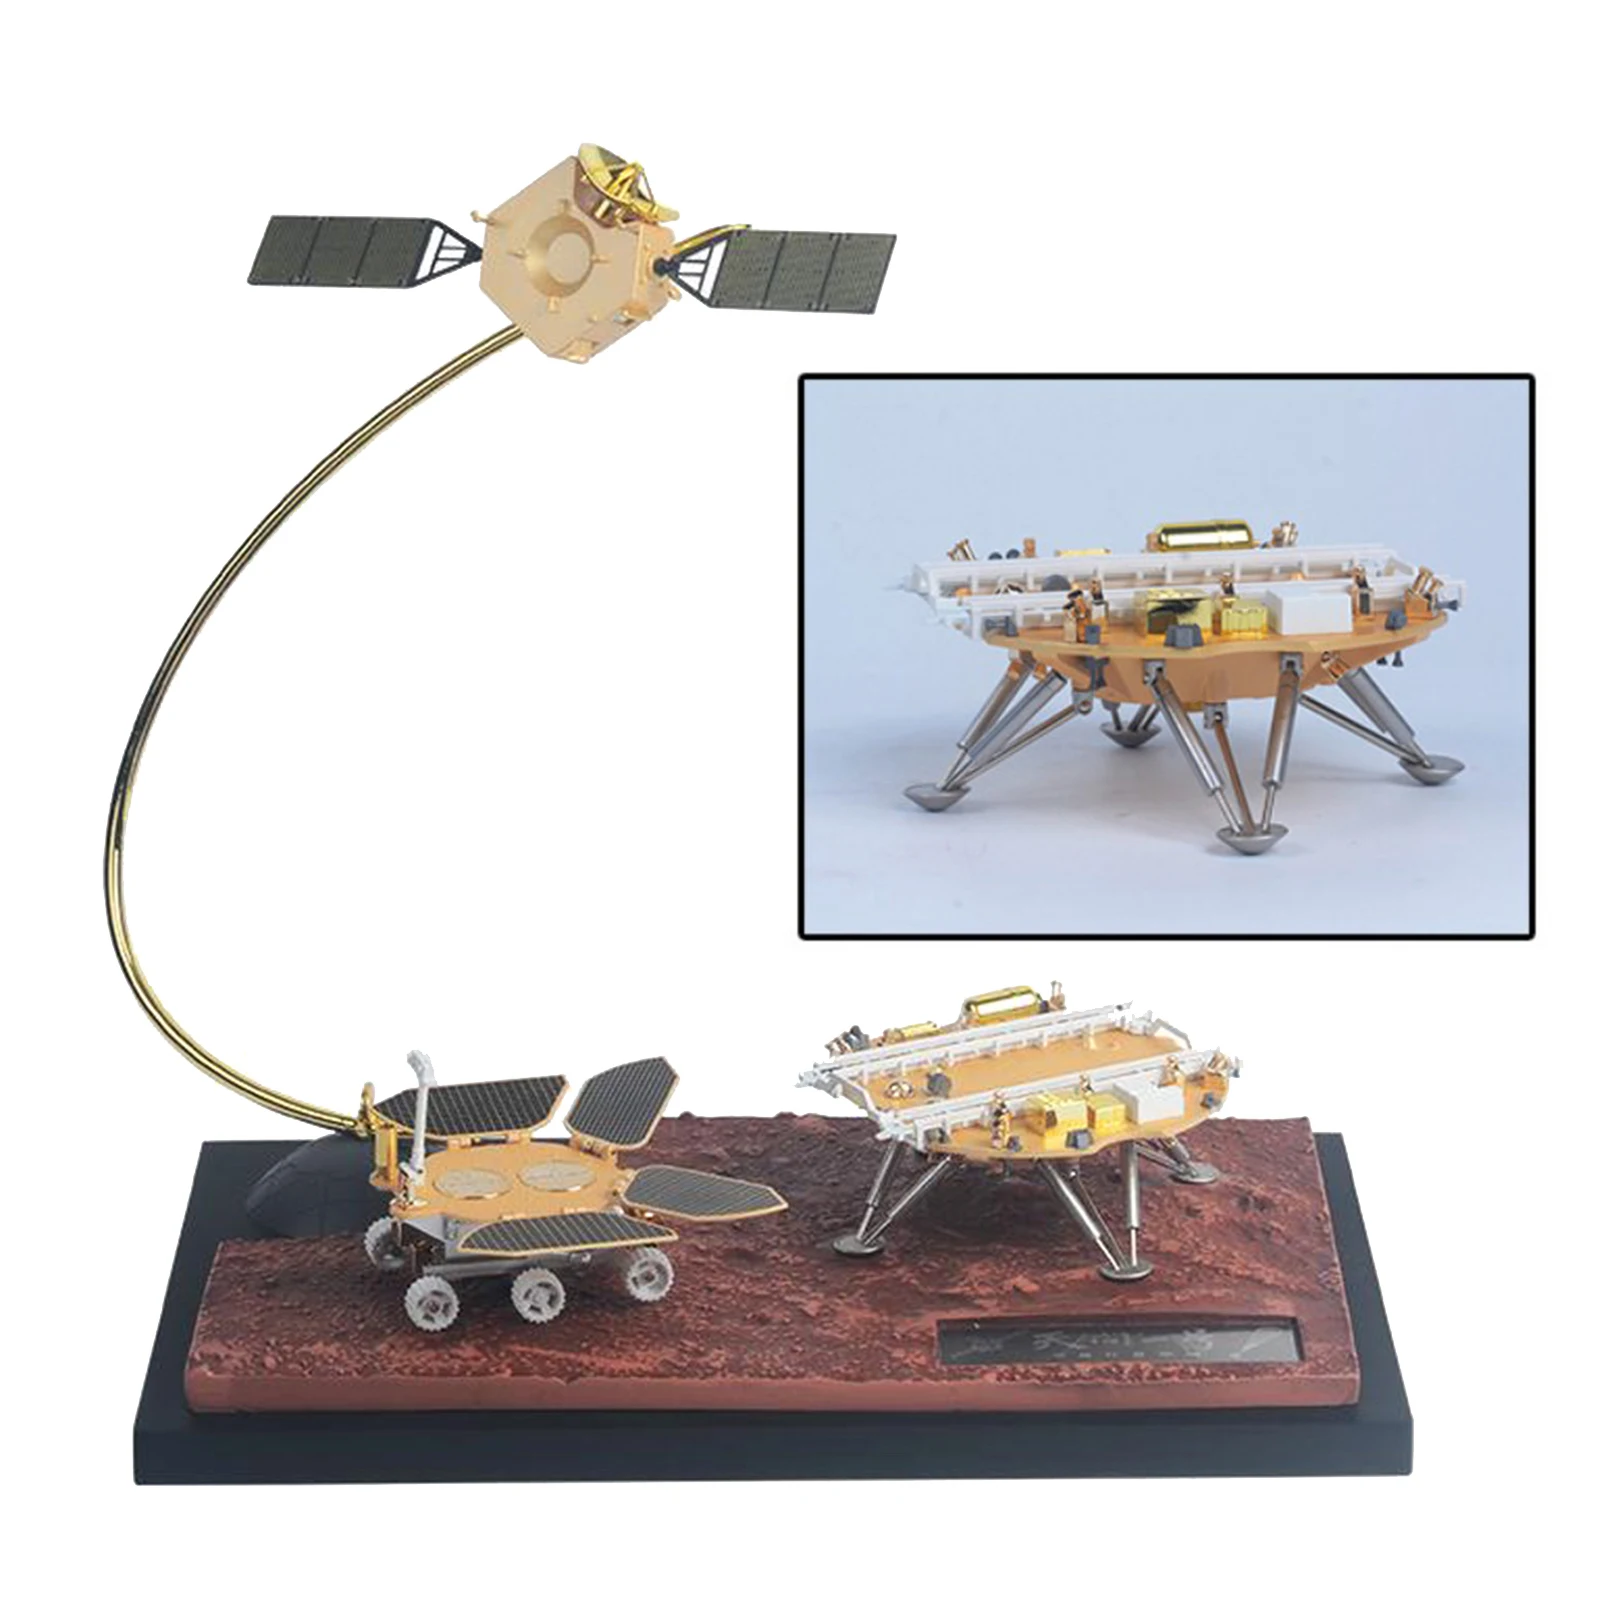 

Diecast 1:26 Space Tianwen-1 CN Mars Rover 3D Model Hobby Science Kit Collection Toy Display Gift